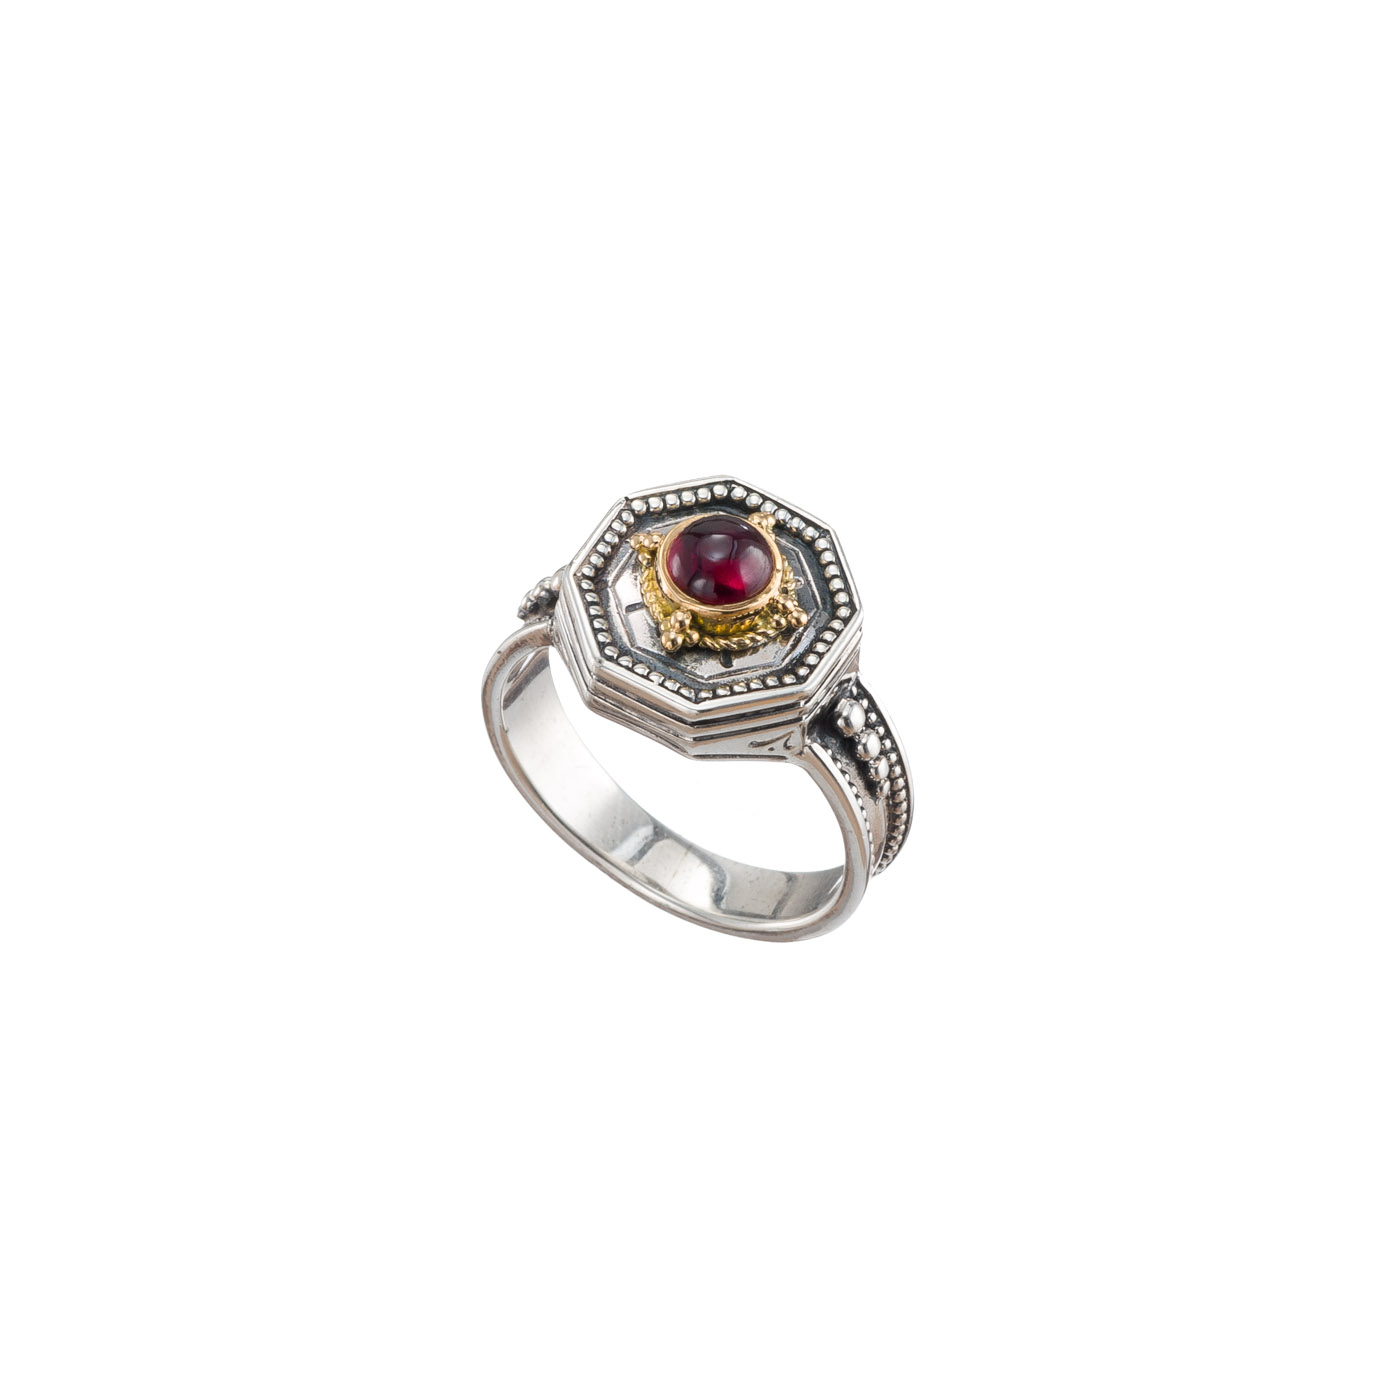 Cyclades polygon ring in 18K Gold and Sterling silver with garnet